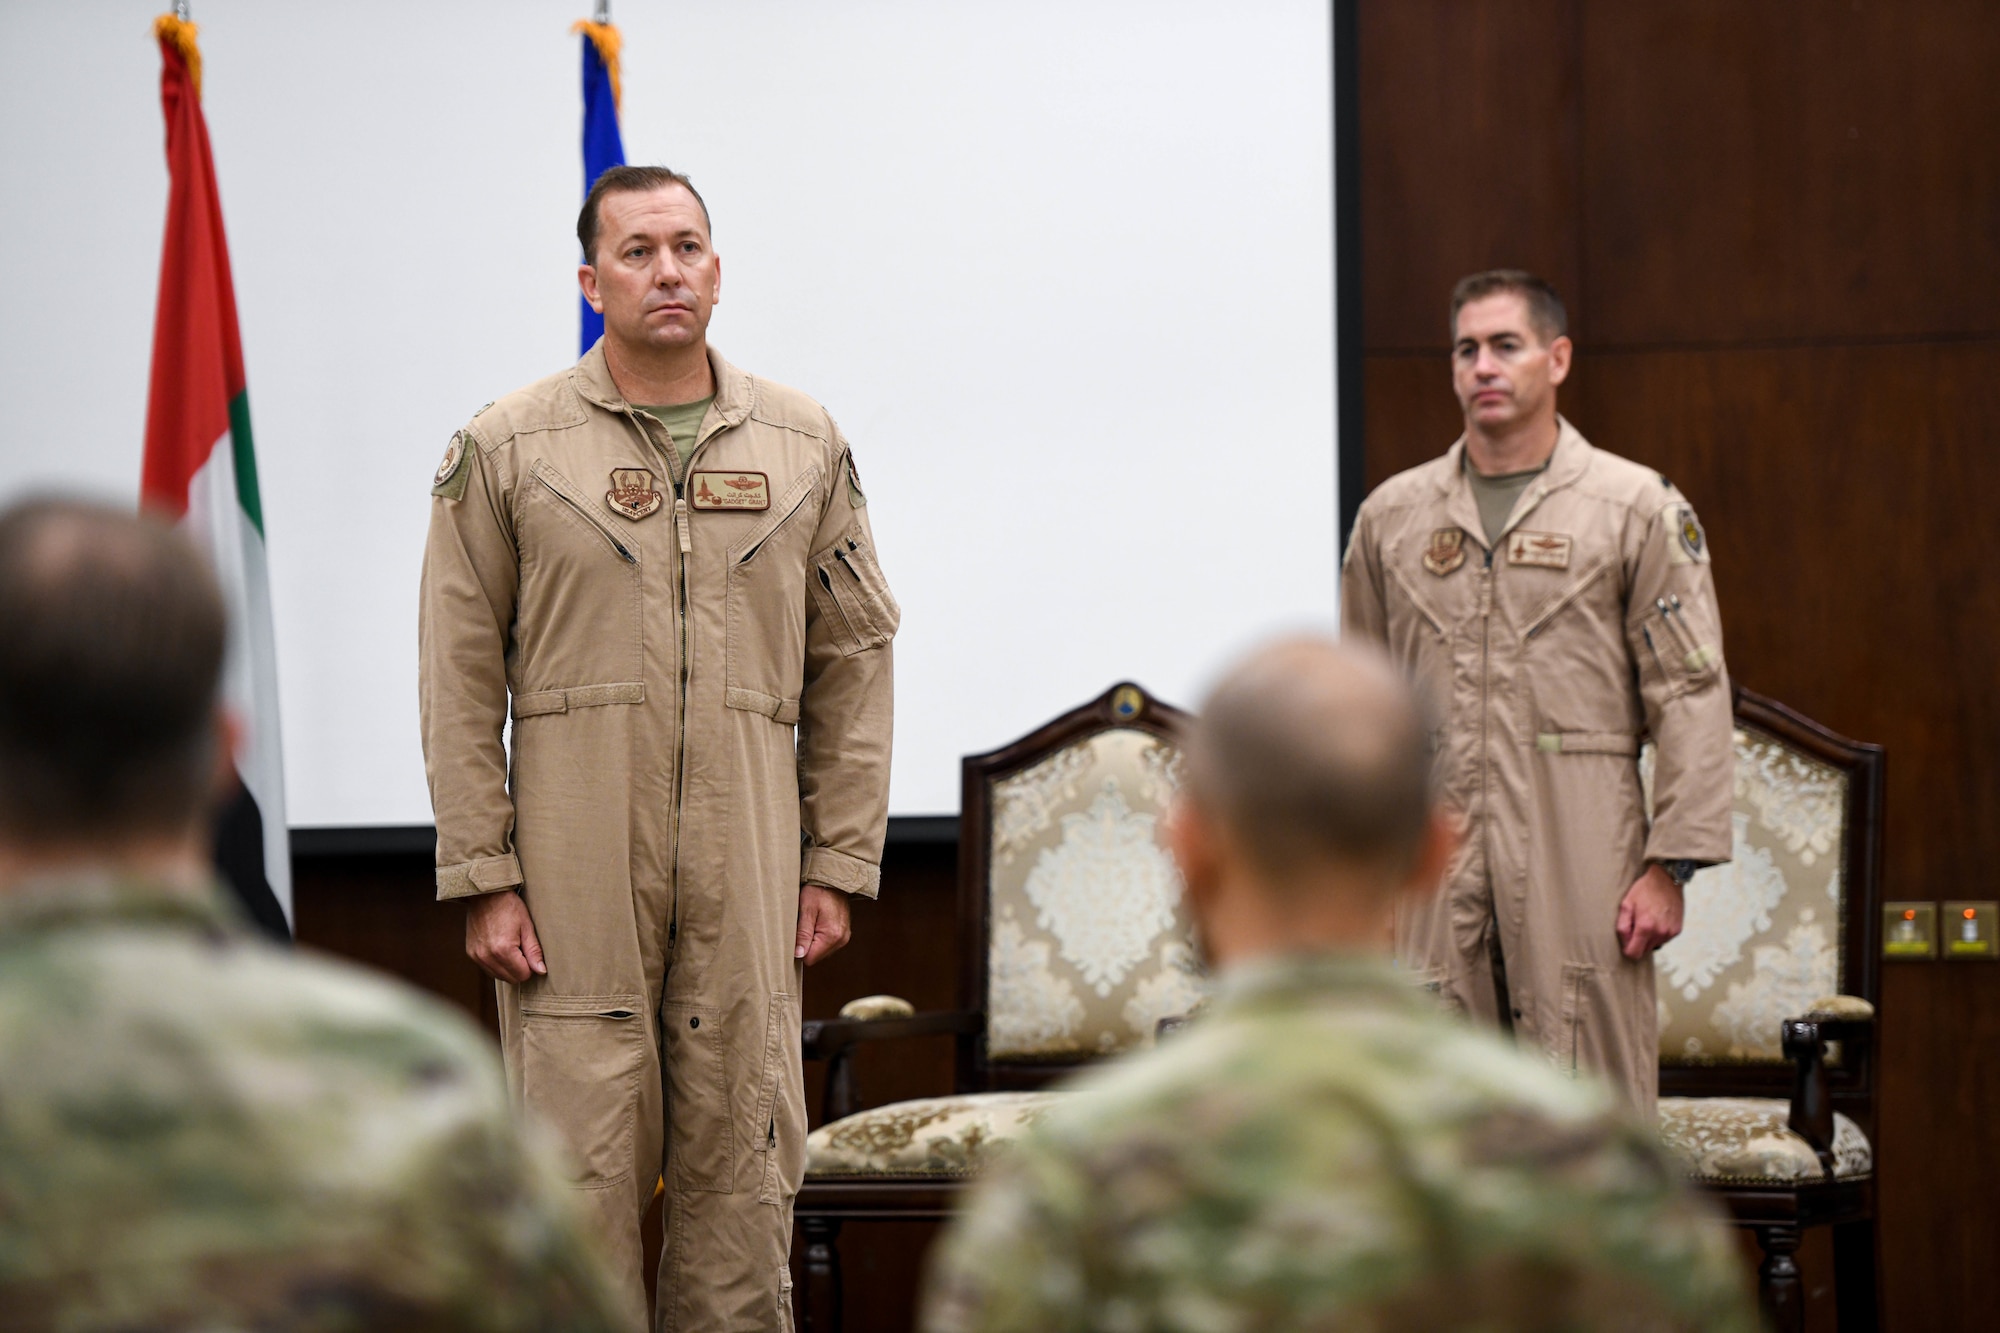 The Ninth Air Force (Air Forces Central) Air Warfare Center held a change of command ceremony July 15, 2022, at Erth Hotel, Abu Dhabi, United Arab Emirates. Col. Jordan G. Grant, the previous commander of AFCENT AWC passed the guidon to Lt. Col Kevin Walsh.